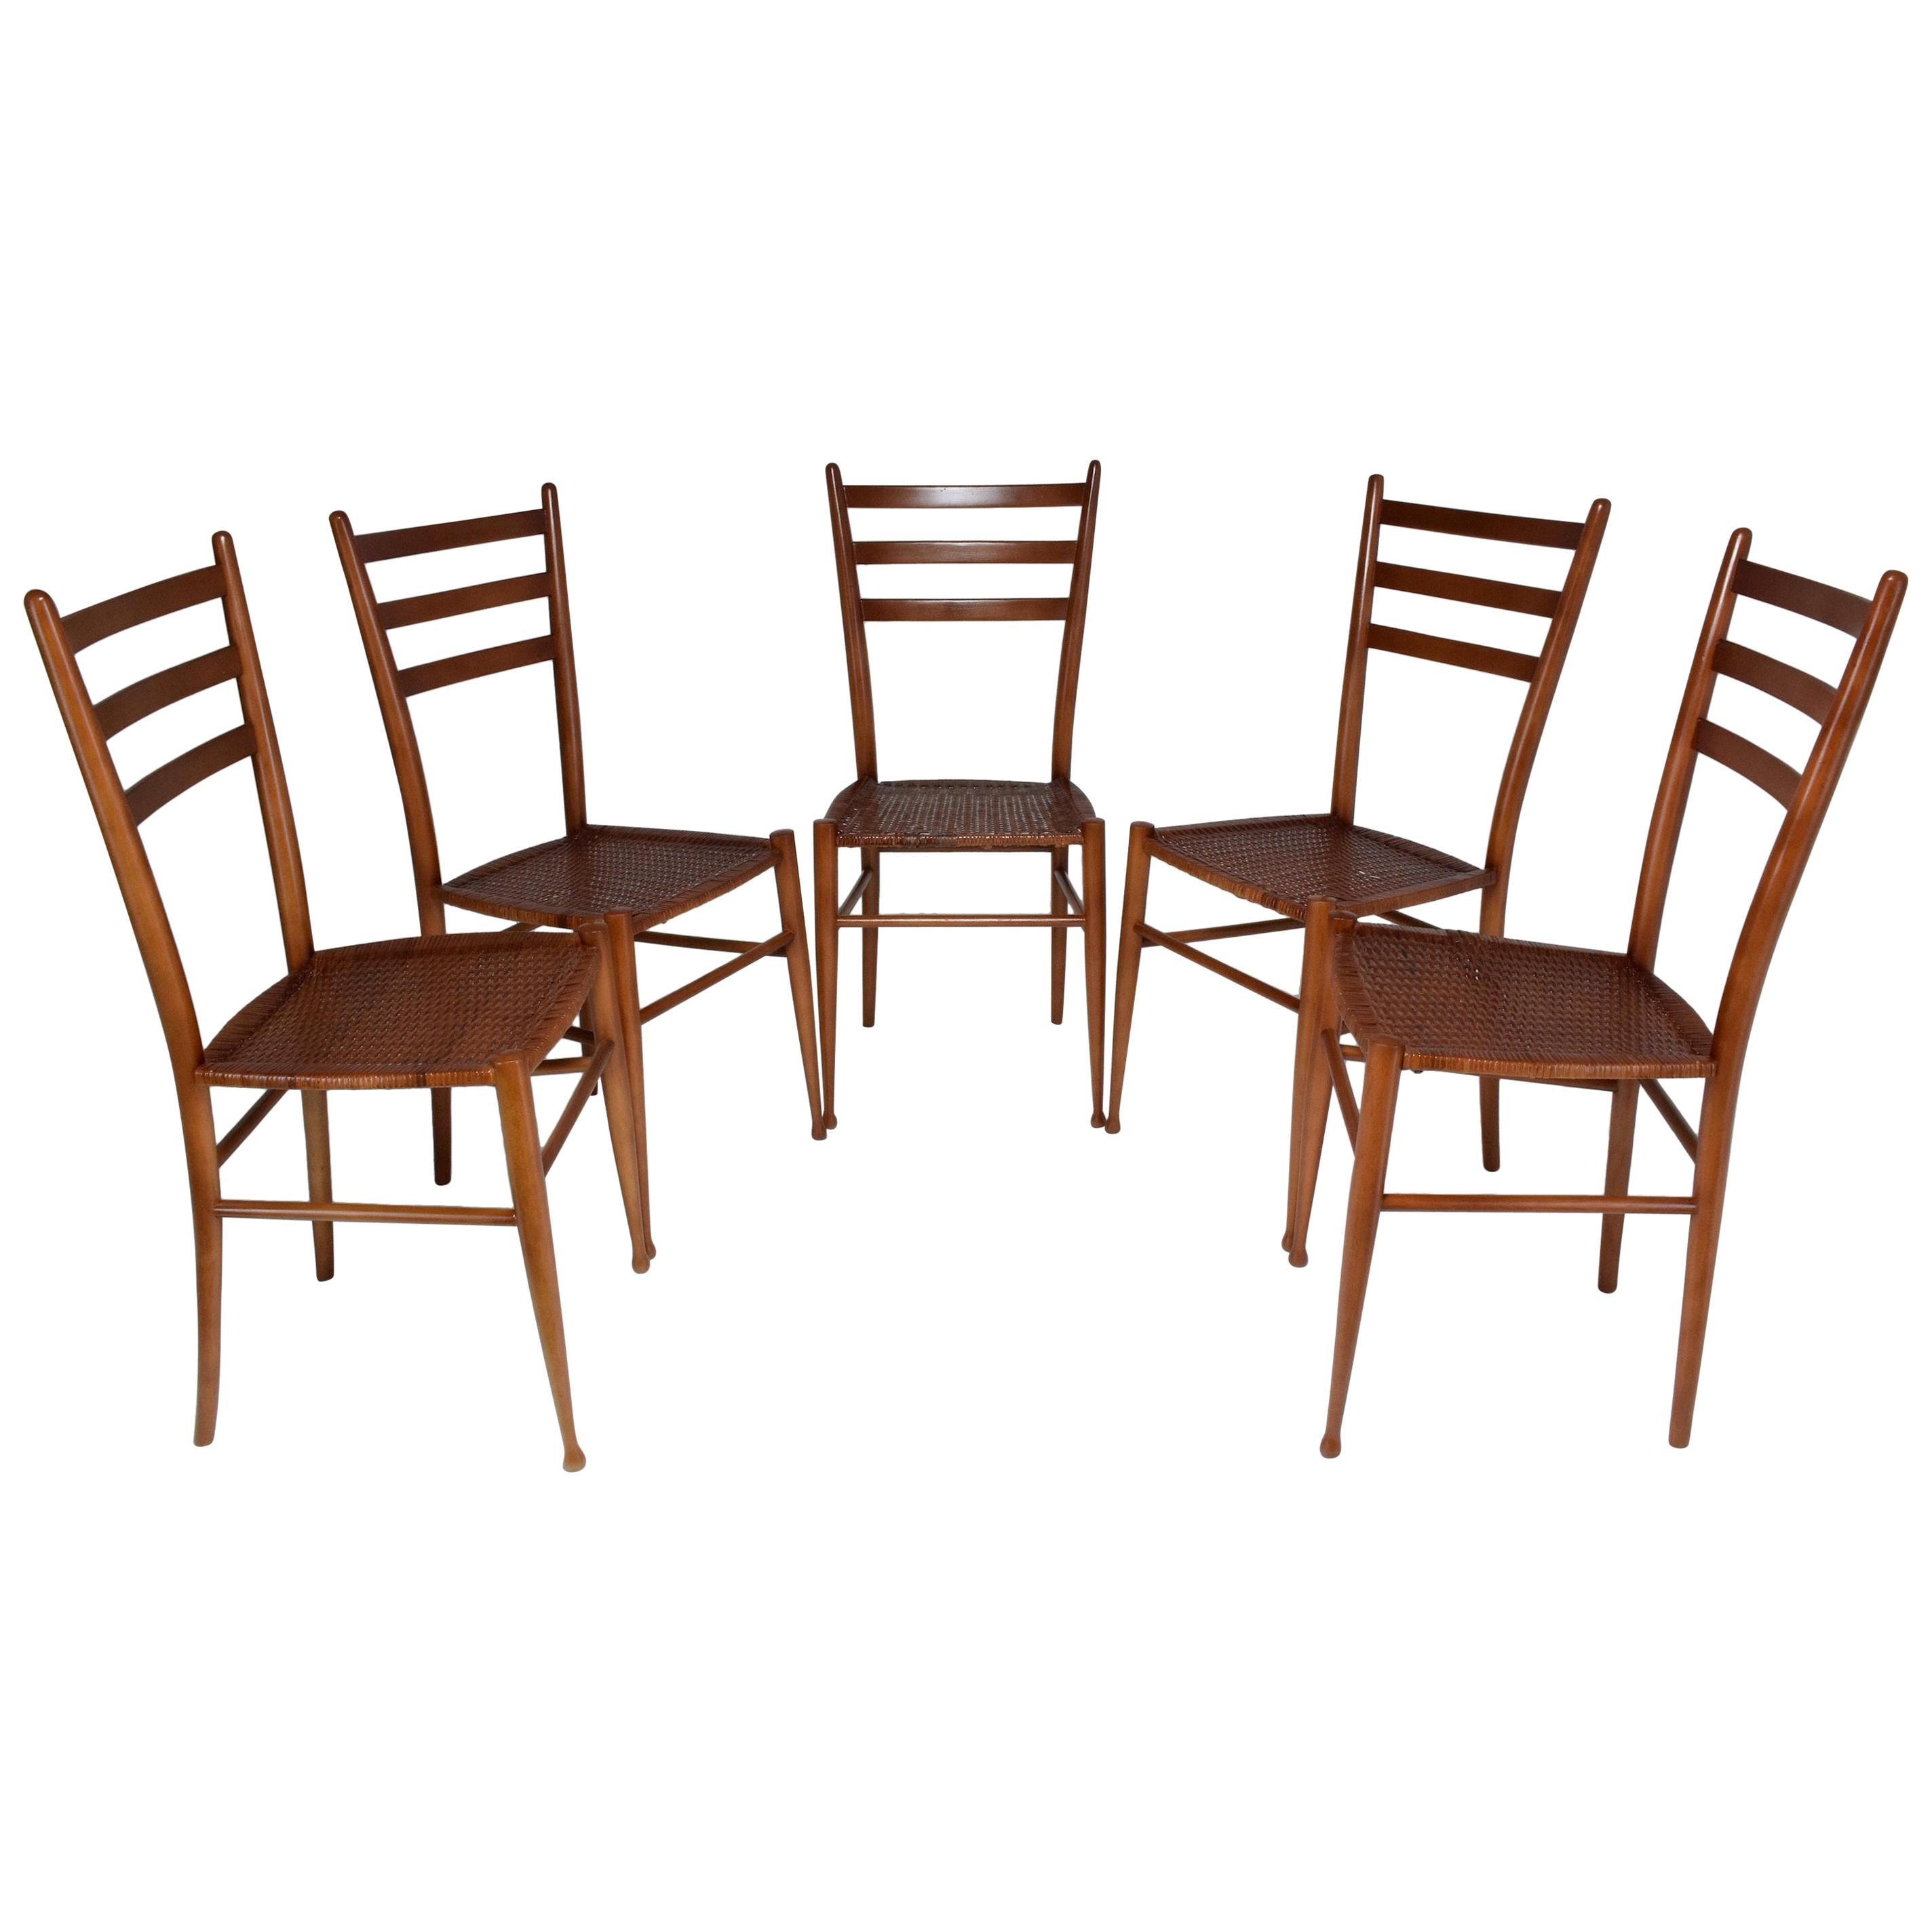 French Vintage Cane Dining Chairs, Set of Five, 1930s